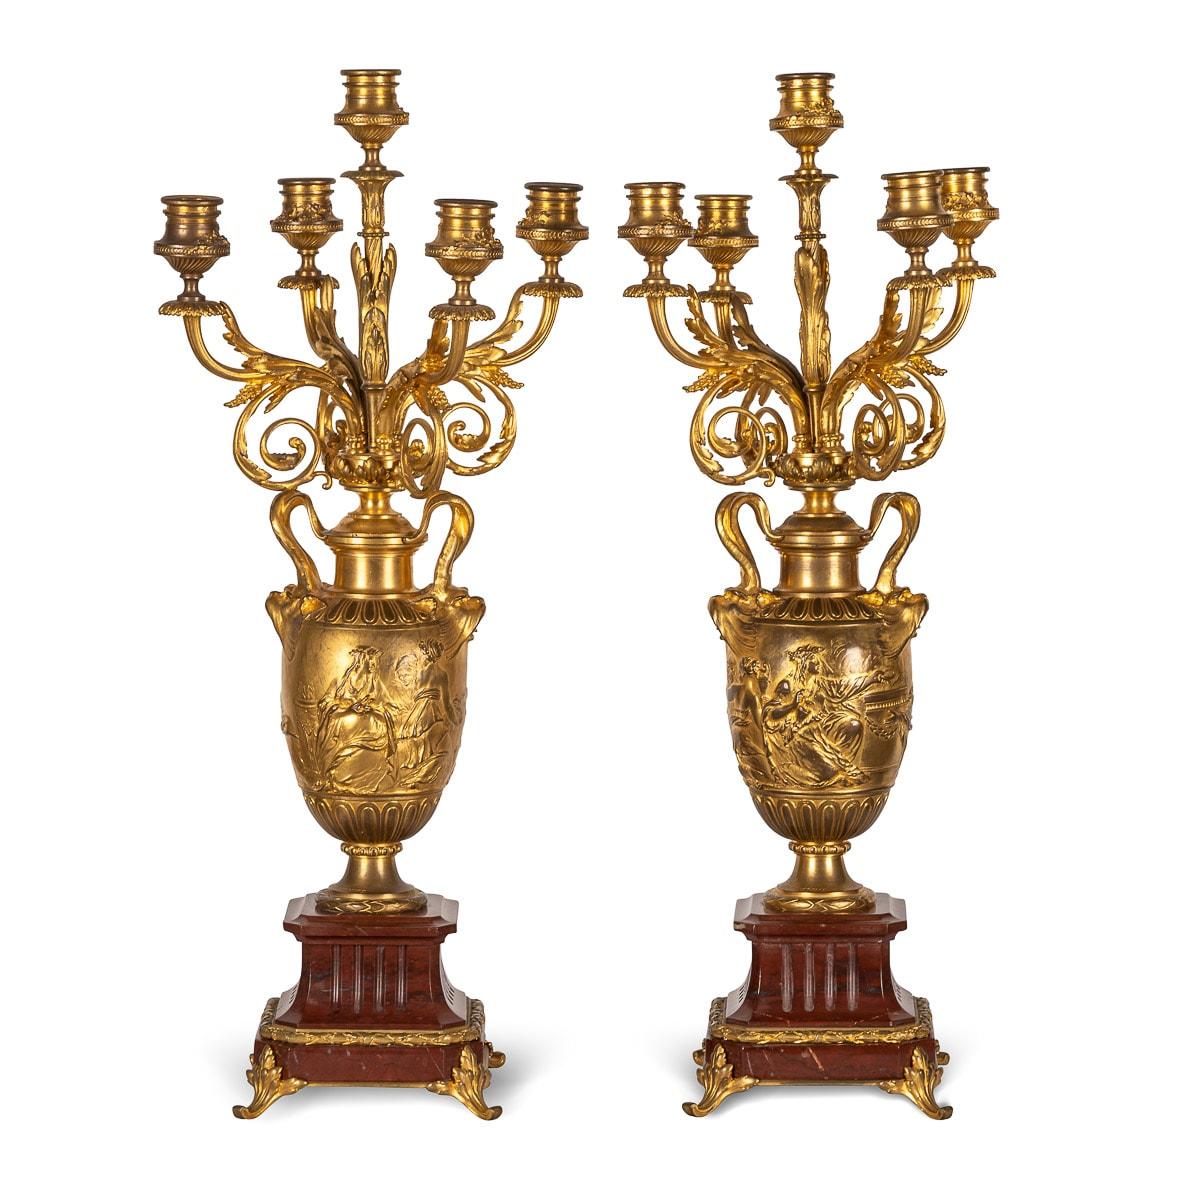 Antique 19th century French pair of bronze and marble candelabras. These exceptional candelabras are by the renowned metalworker Ferdinand Barbedienne, made from rouge griotte marble and and applied with ormolu bronze. Each candelabrum standing on a